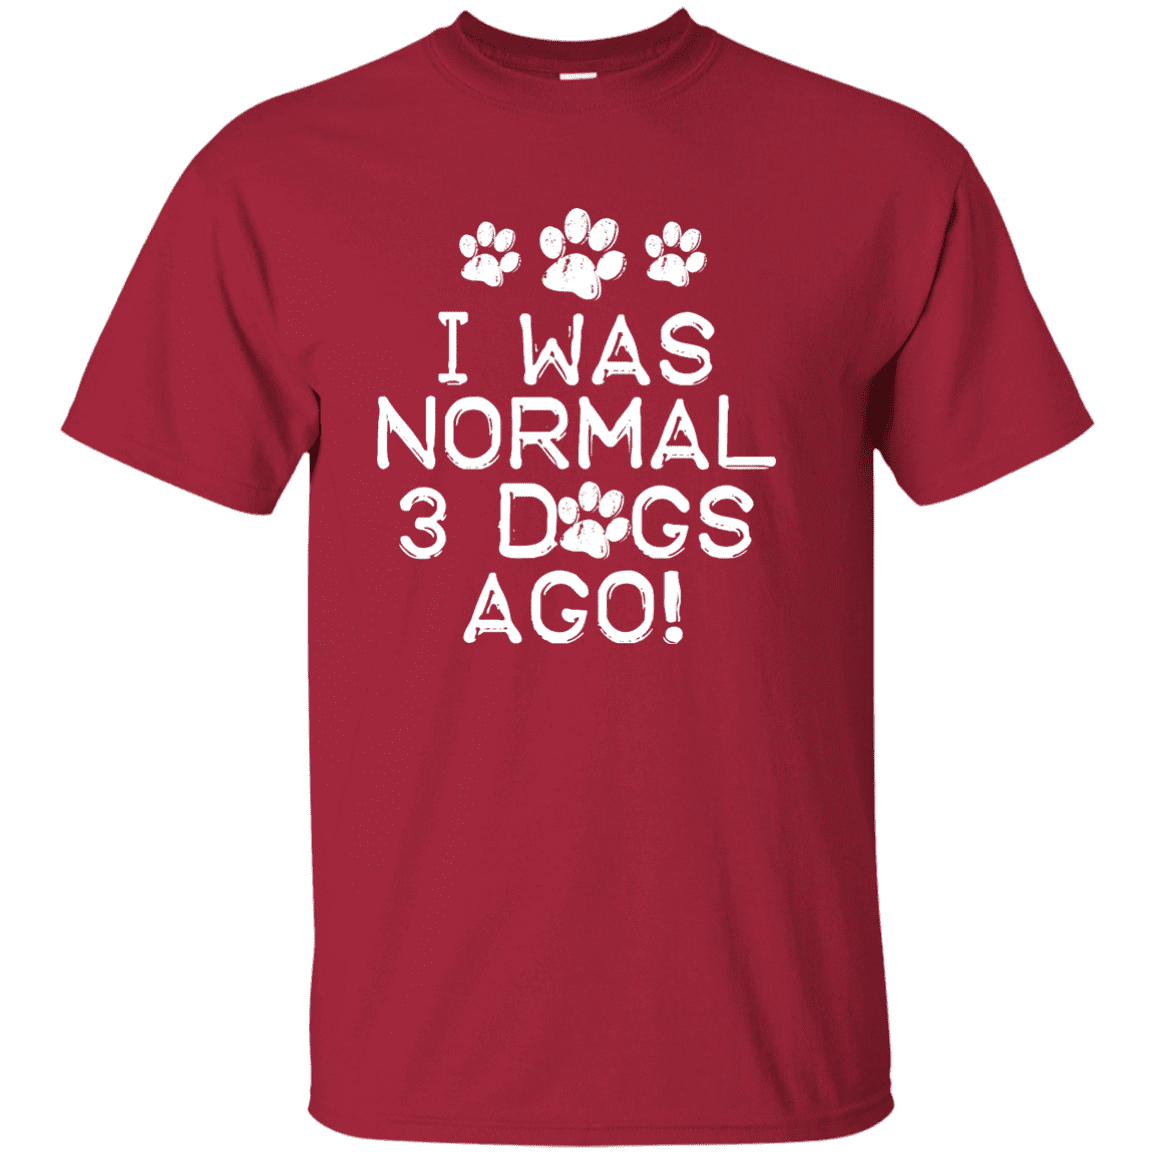 I Was Normal Dogs - T Shirt.